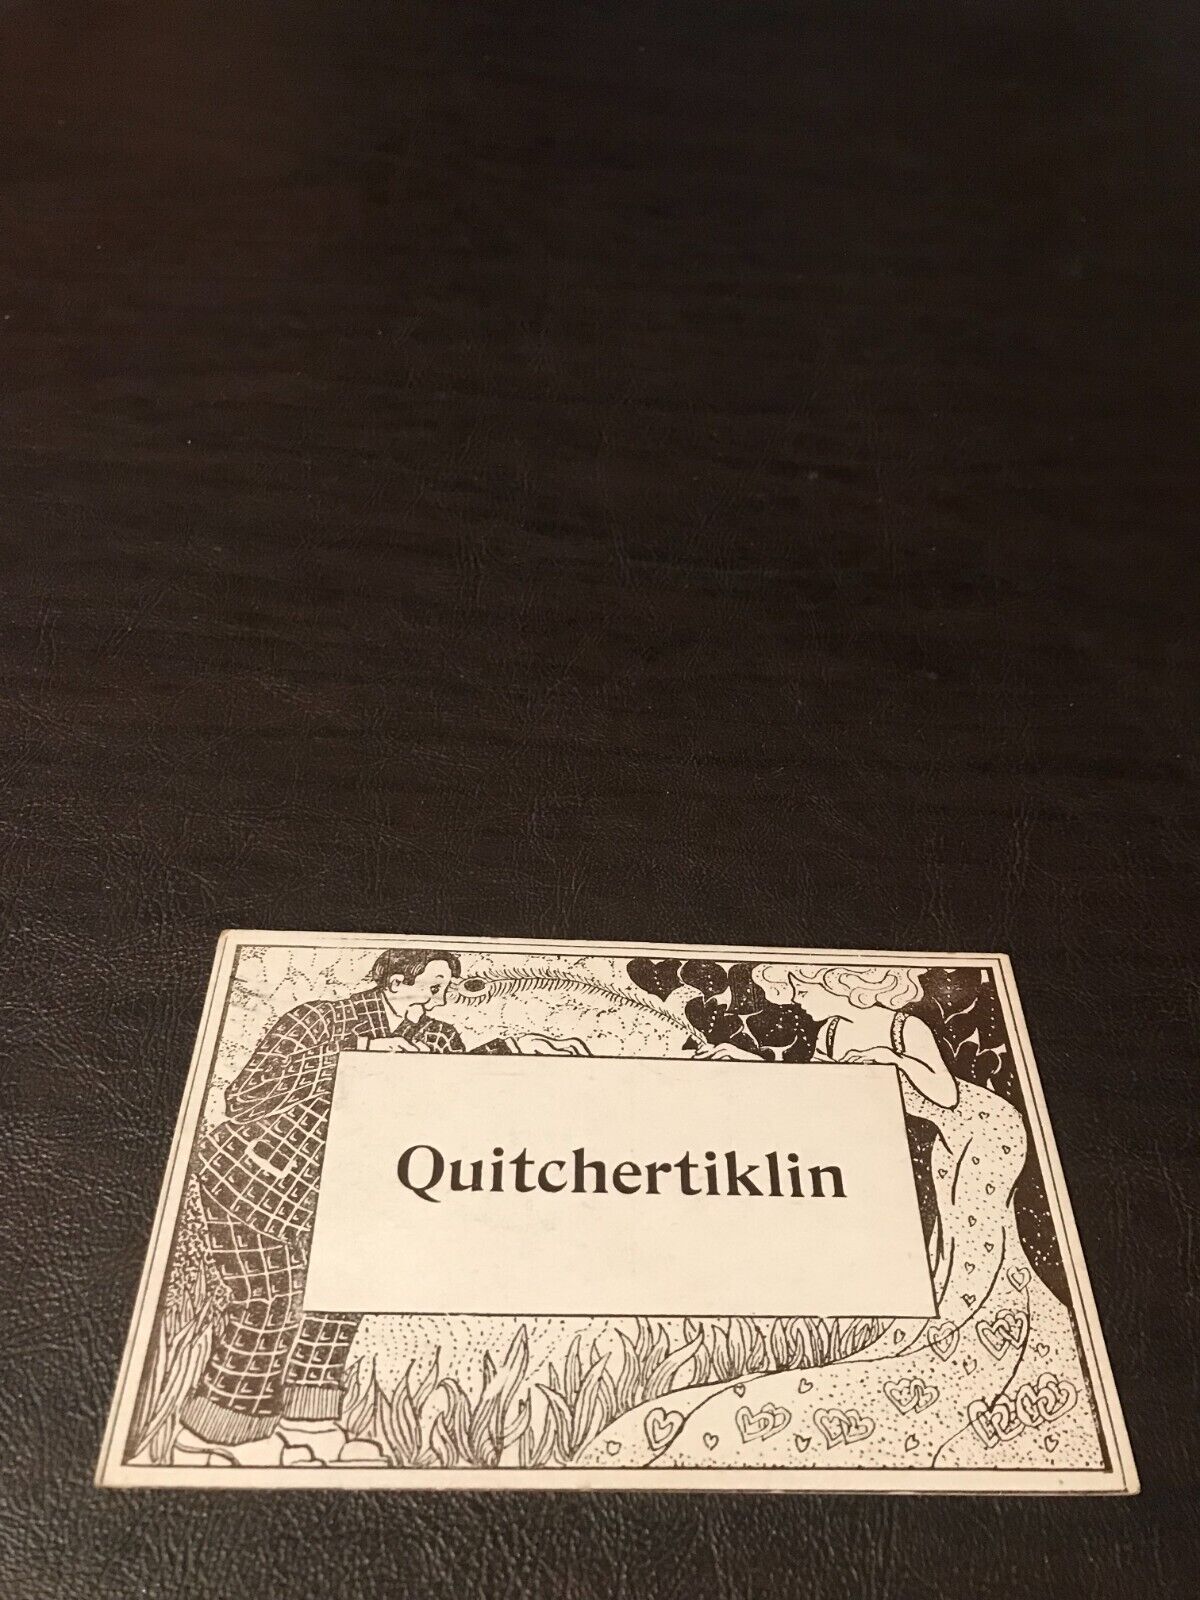 EARLY 1910 POSTED POSTCARD - QUITCHERTIKLIN